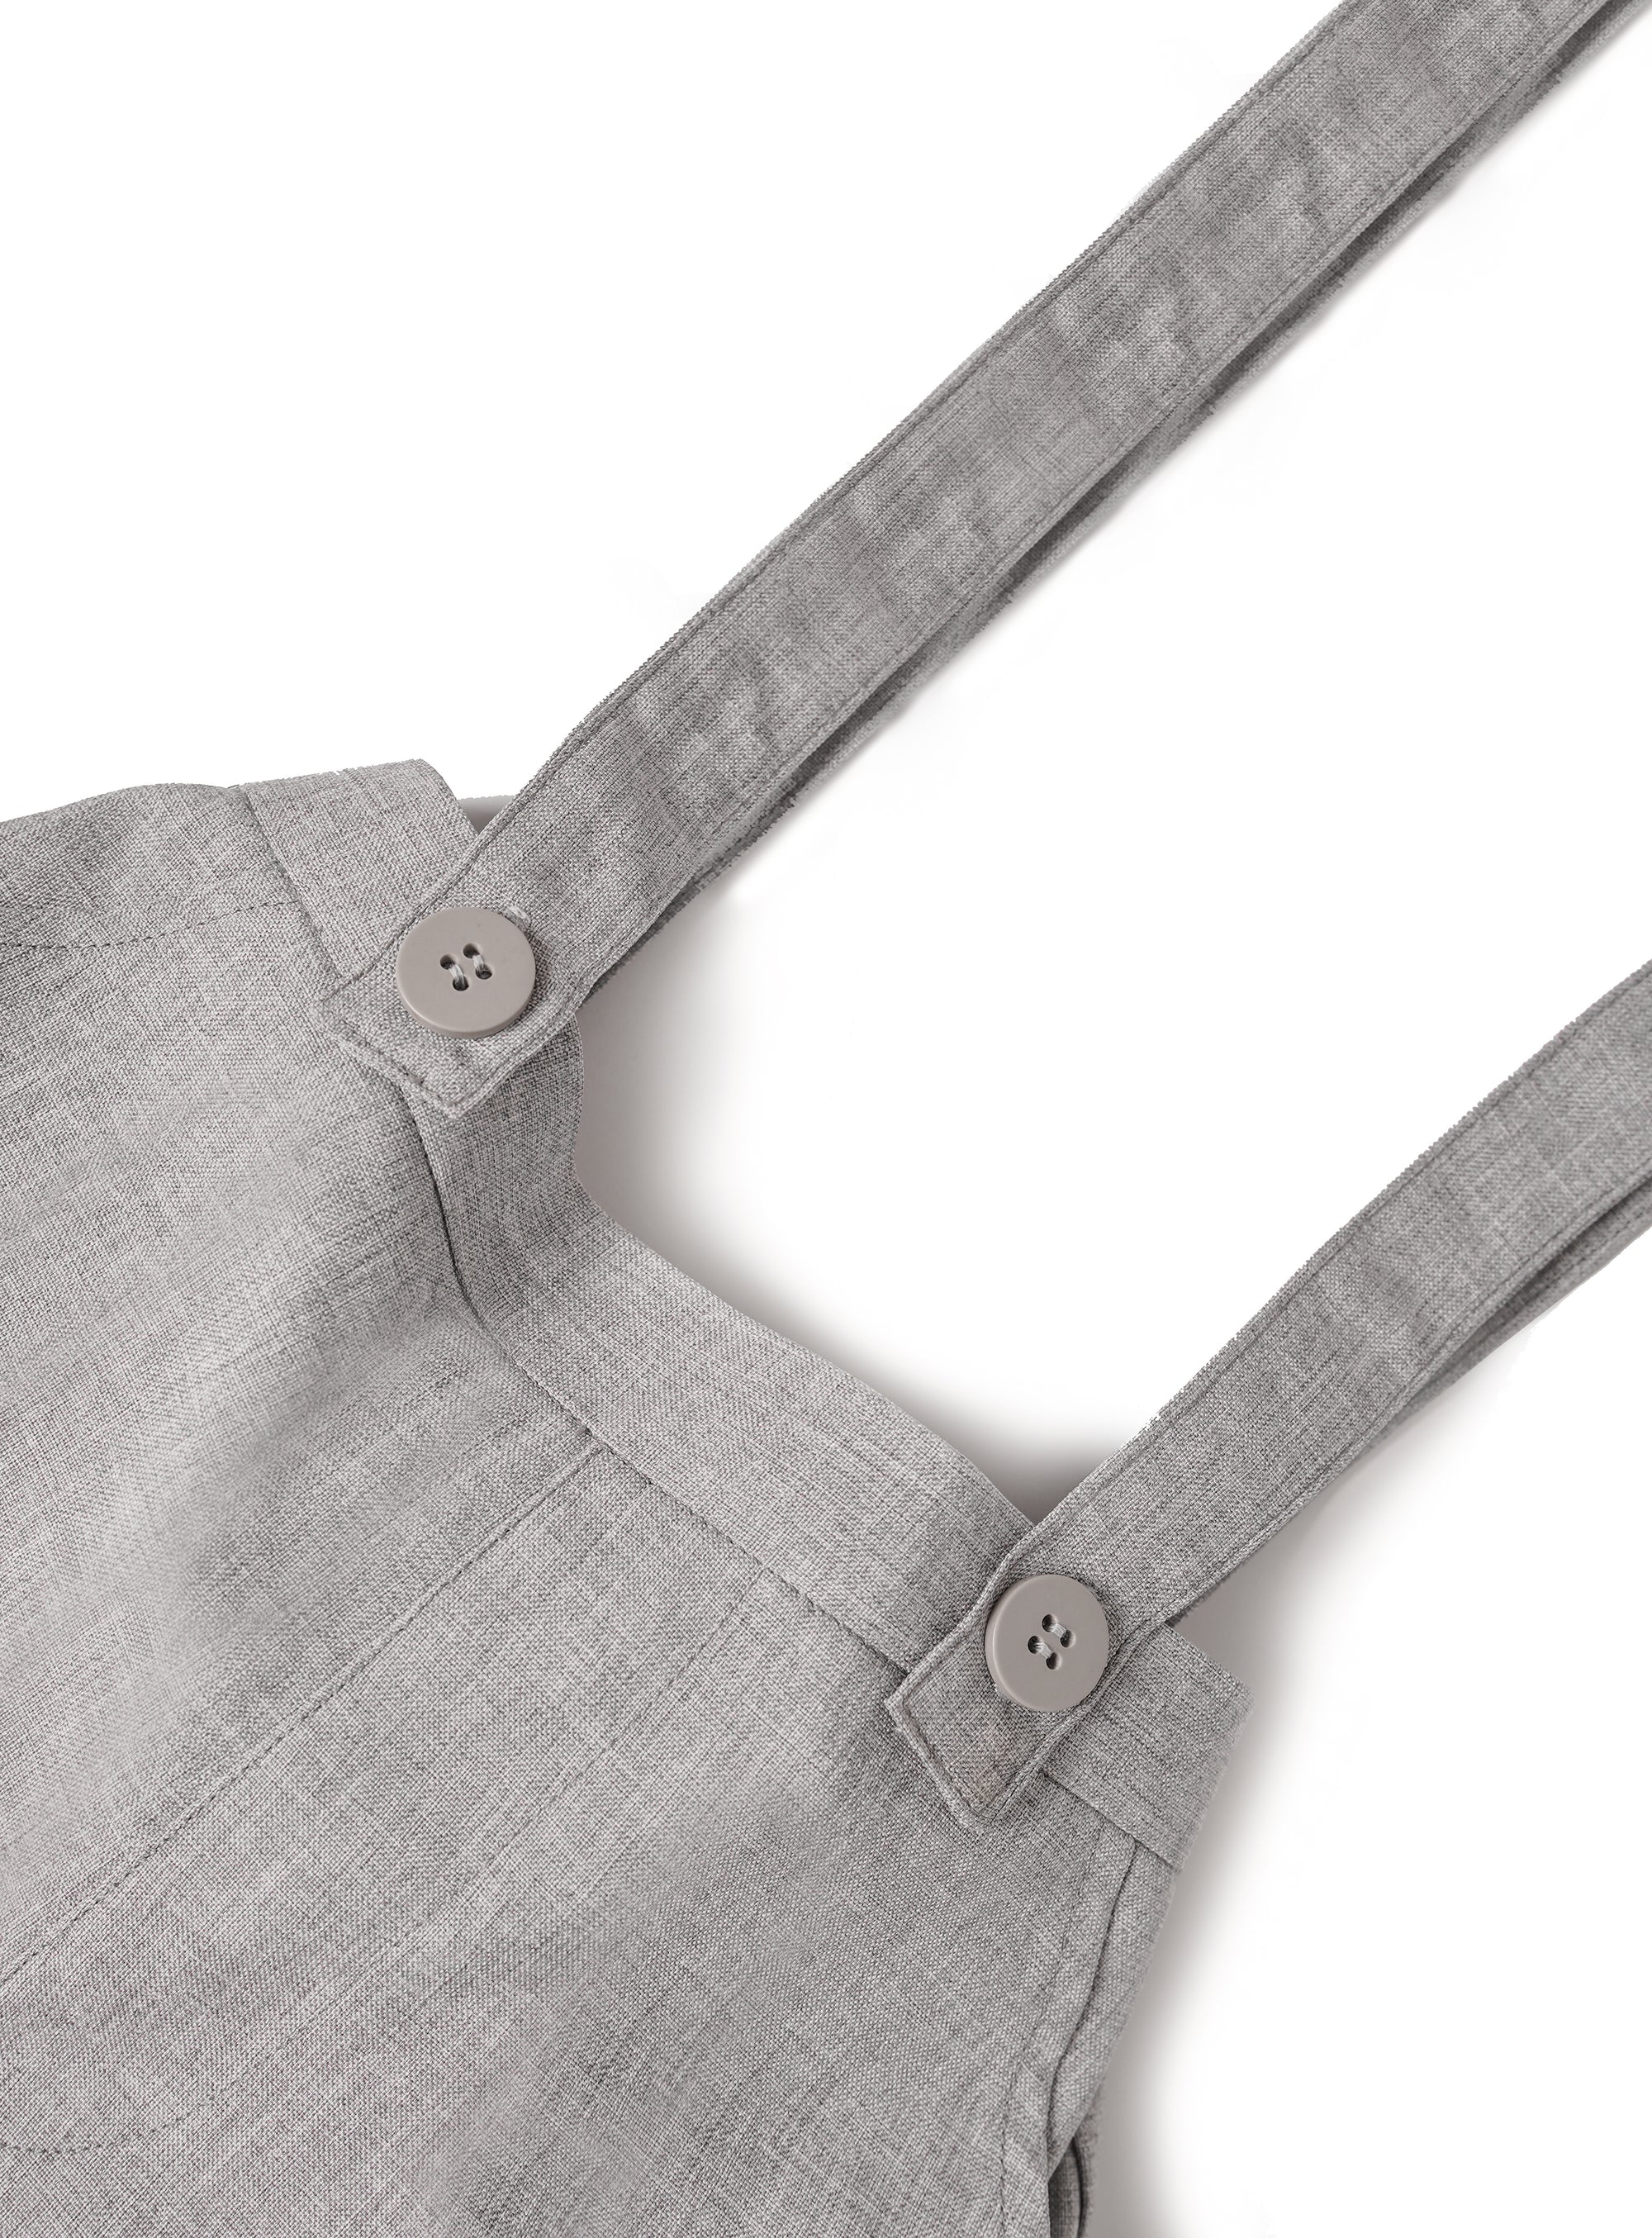 ghost gray overall with matching buttons